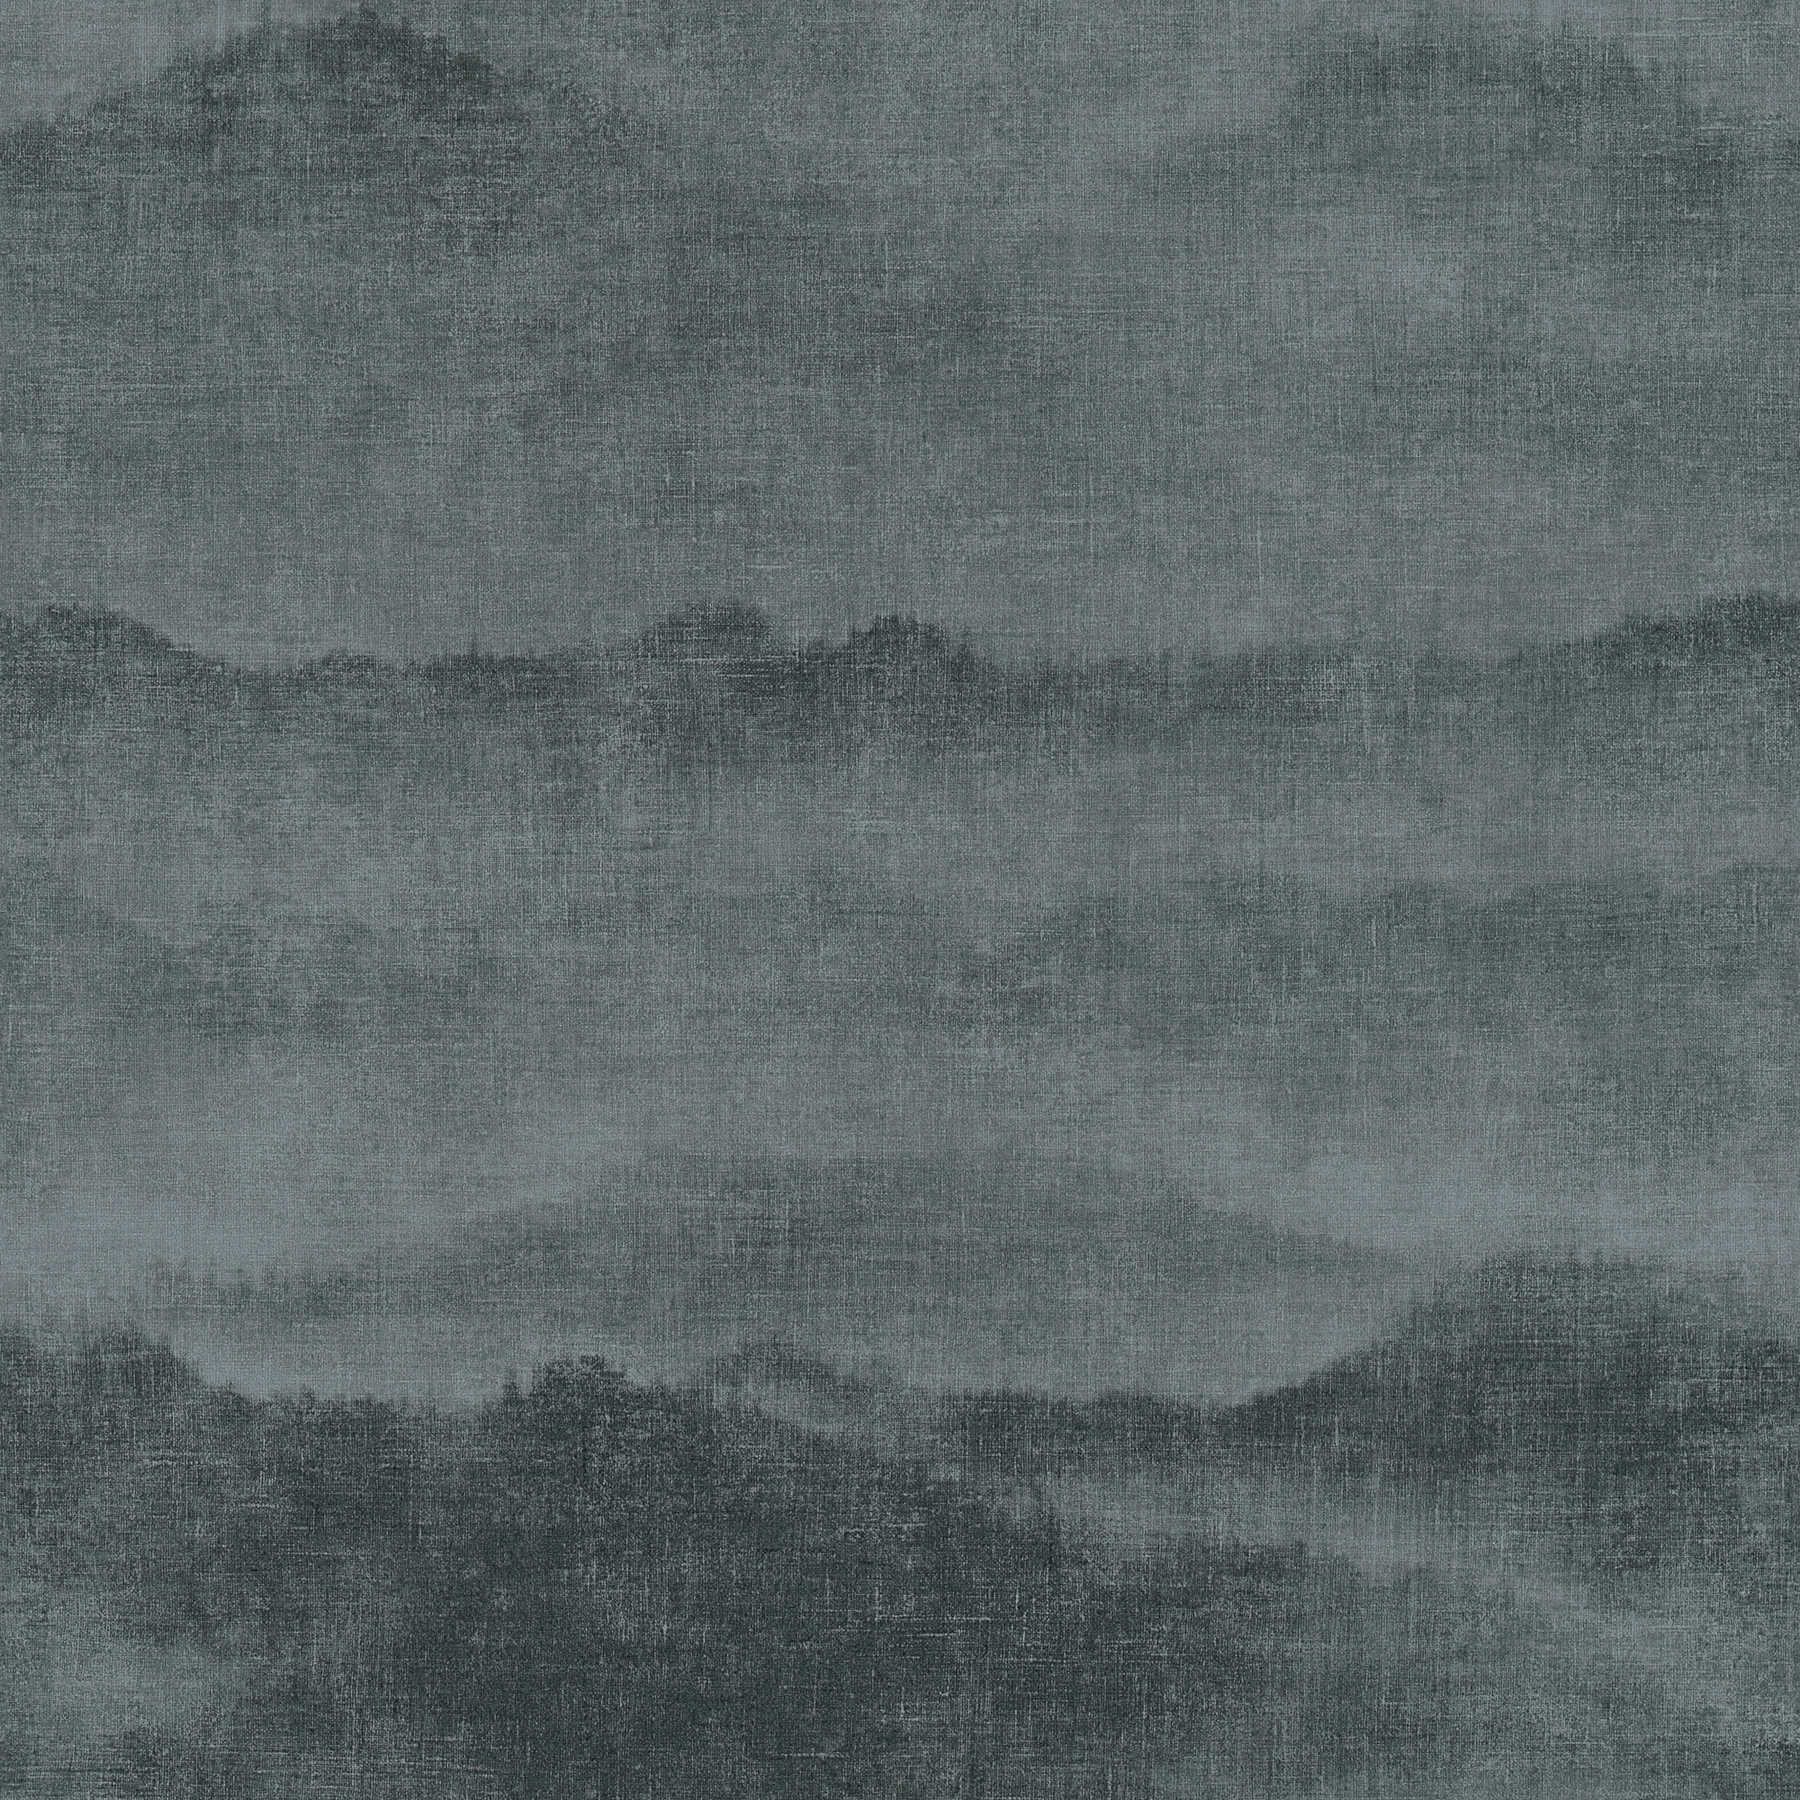         Linen look wallpaper black with gradient in watercolour style
    